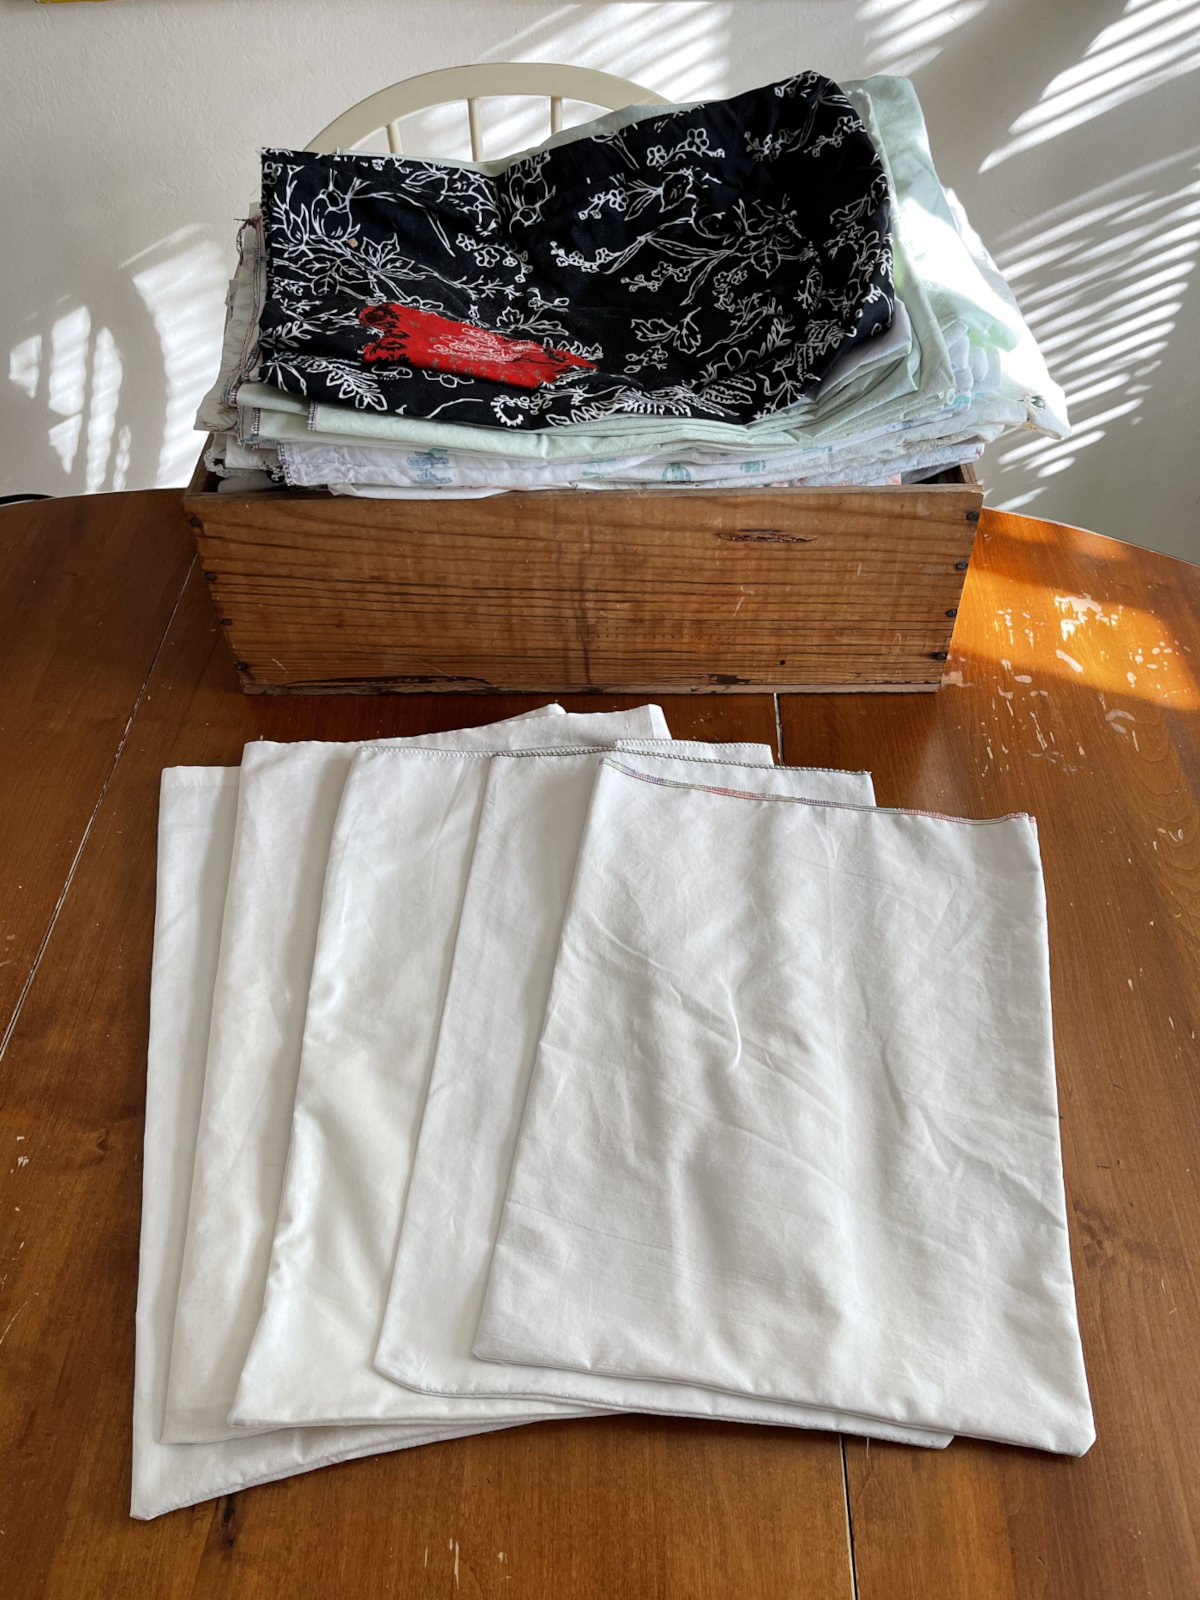 A stack of reusable cloth produce bags sits in a wooden box on a wooden table. Five white cloth produce bags are arranged on the table in front of the box.